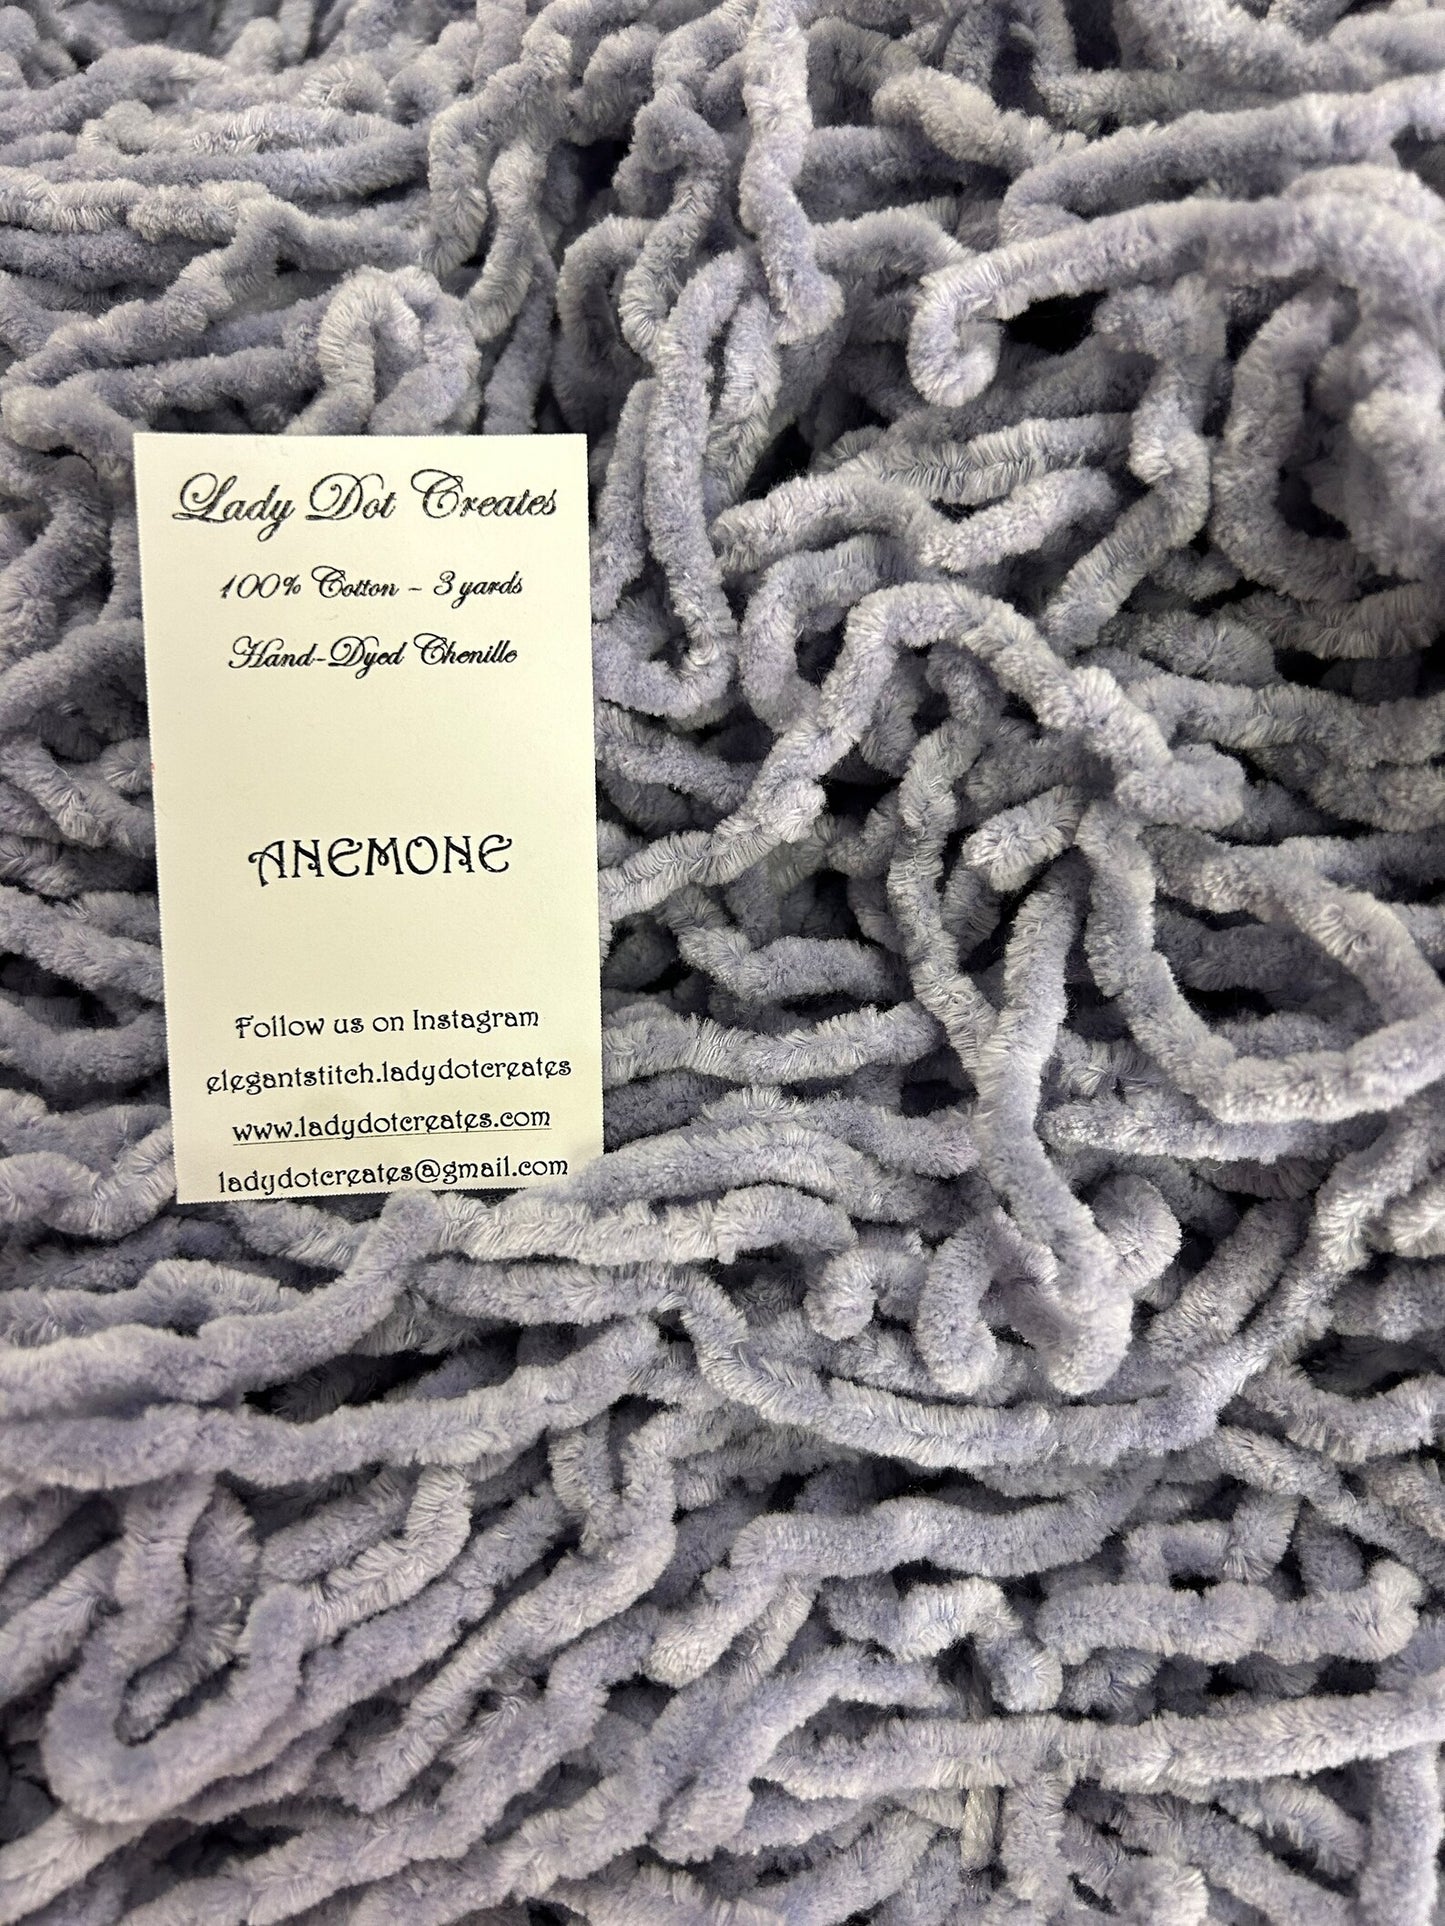 Anemone Chenille by Lady Dot Creates